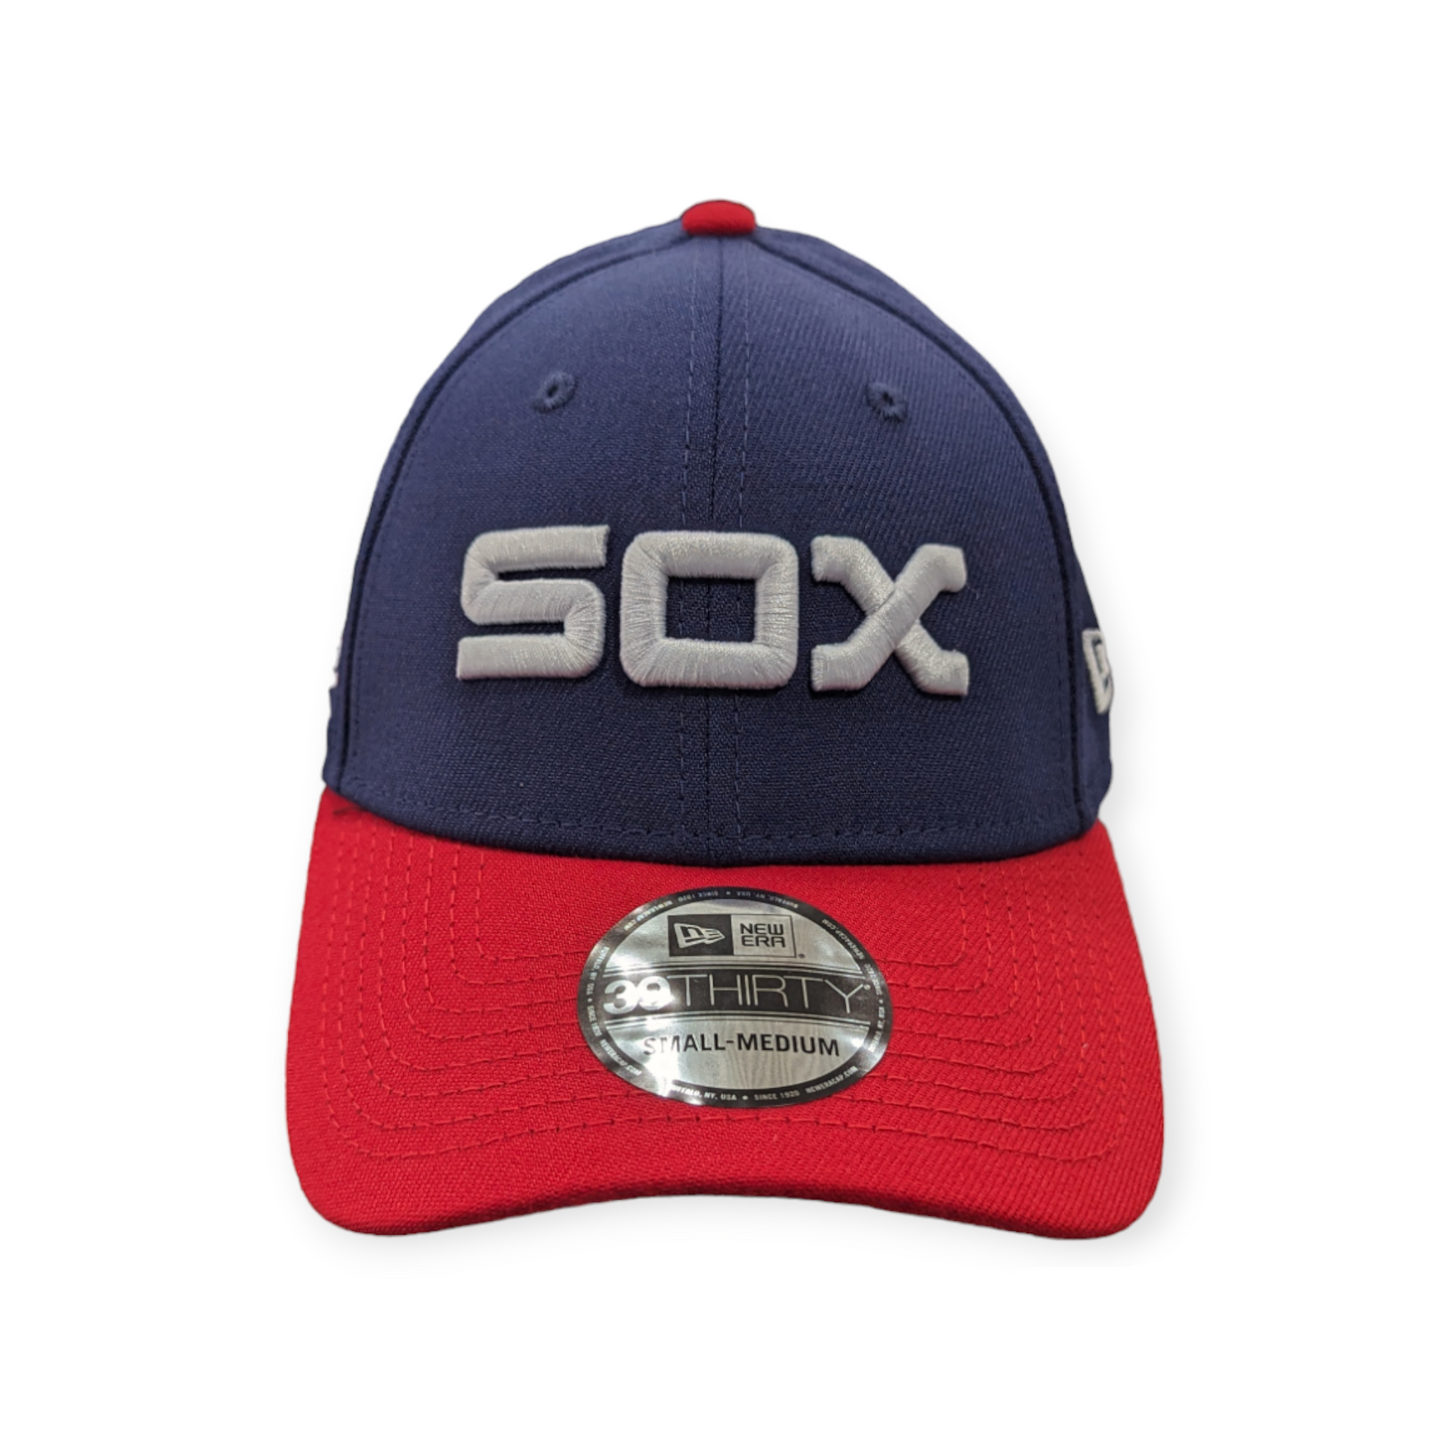 Chicago White Sox 1983 Road 2 Tone Navy/Red 75 Years 39THIRTY Flex Hat